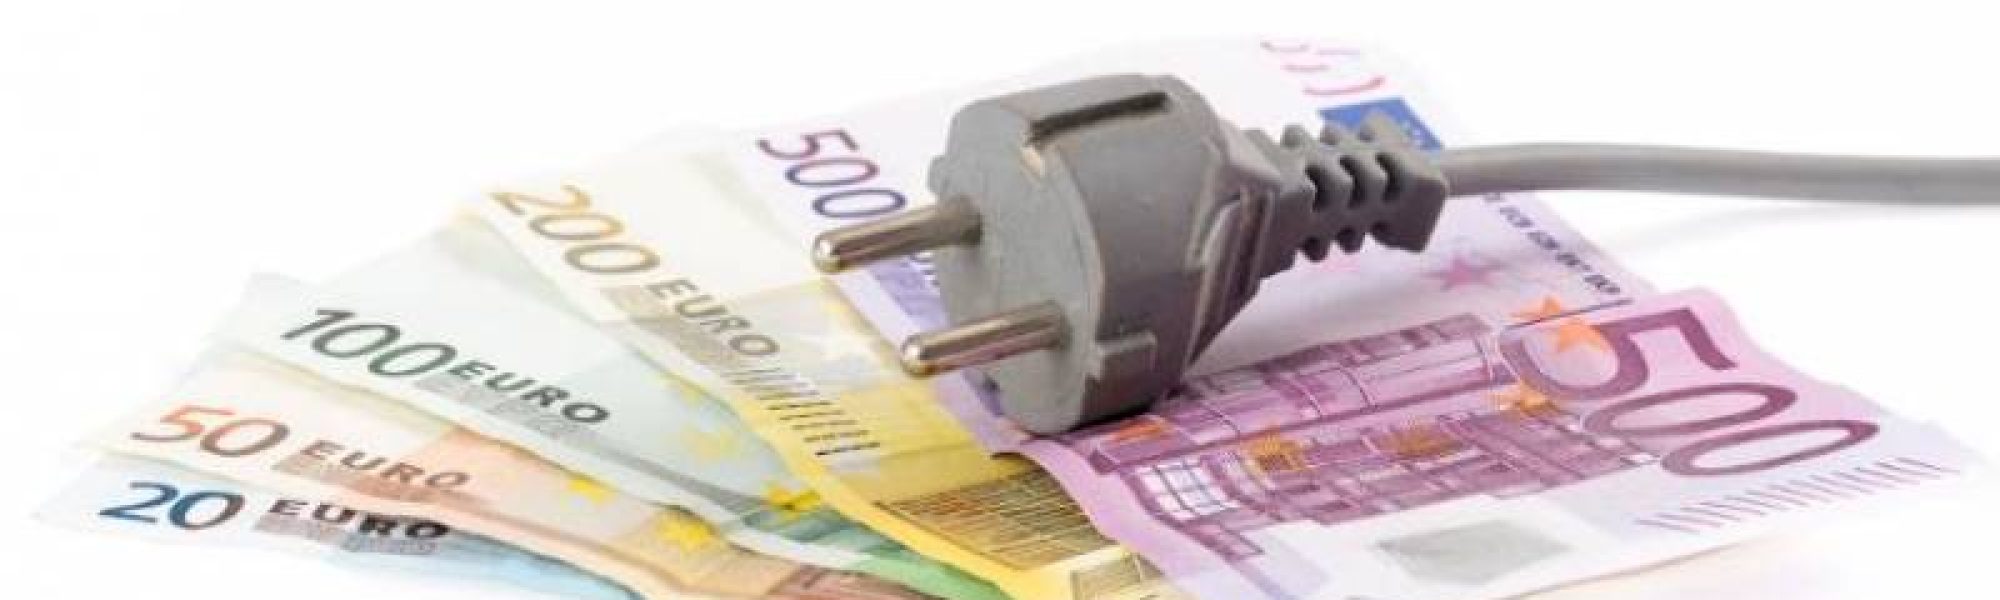 New regulated electricity tariff: savings of 300M euros for 9M households in Spain